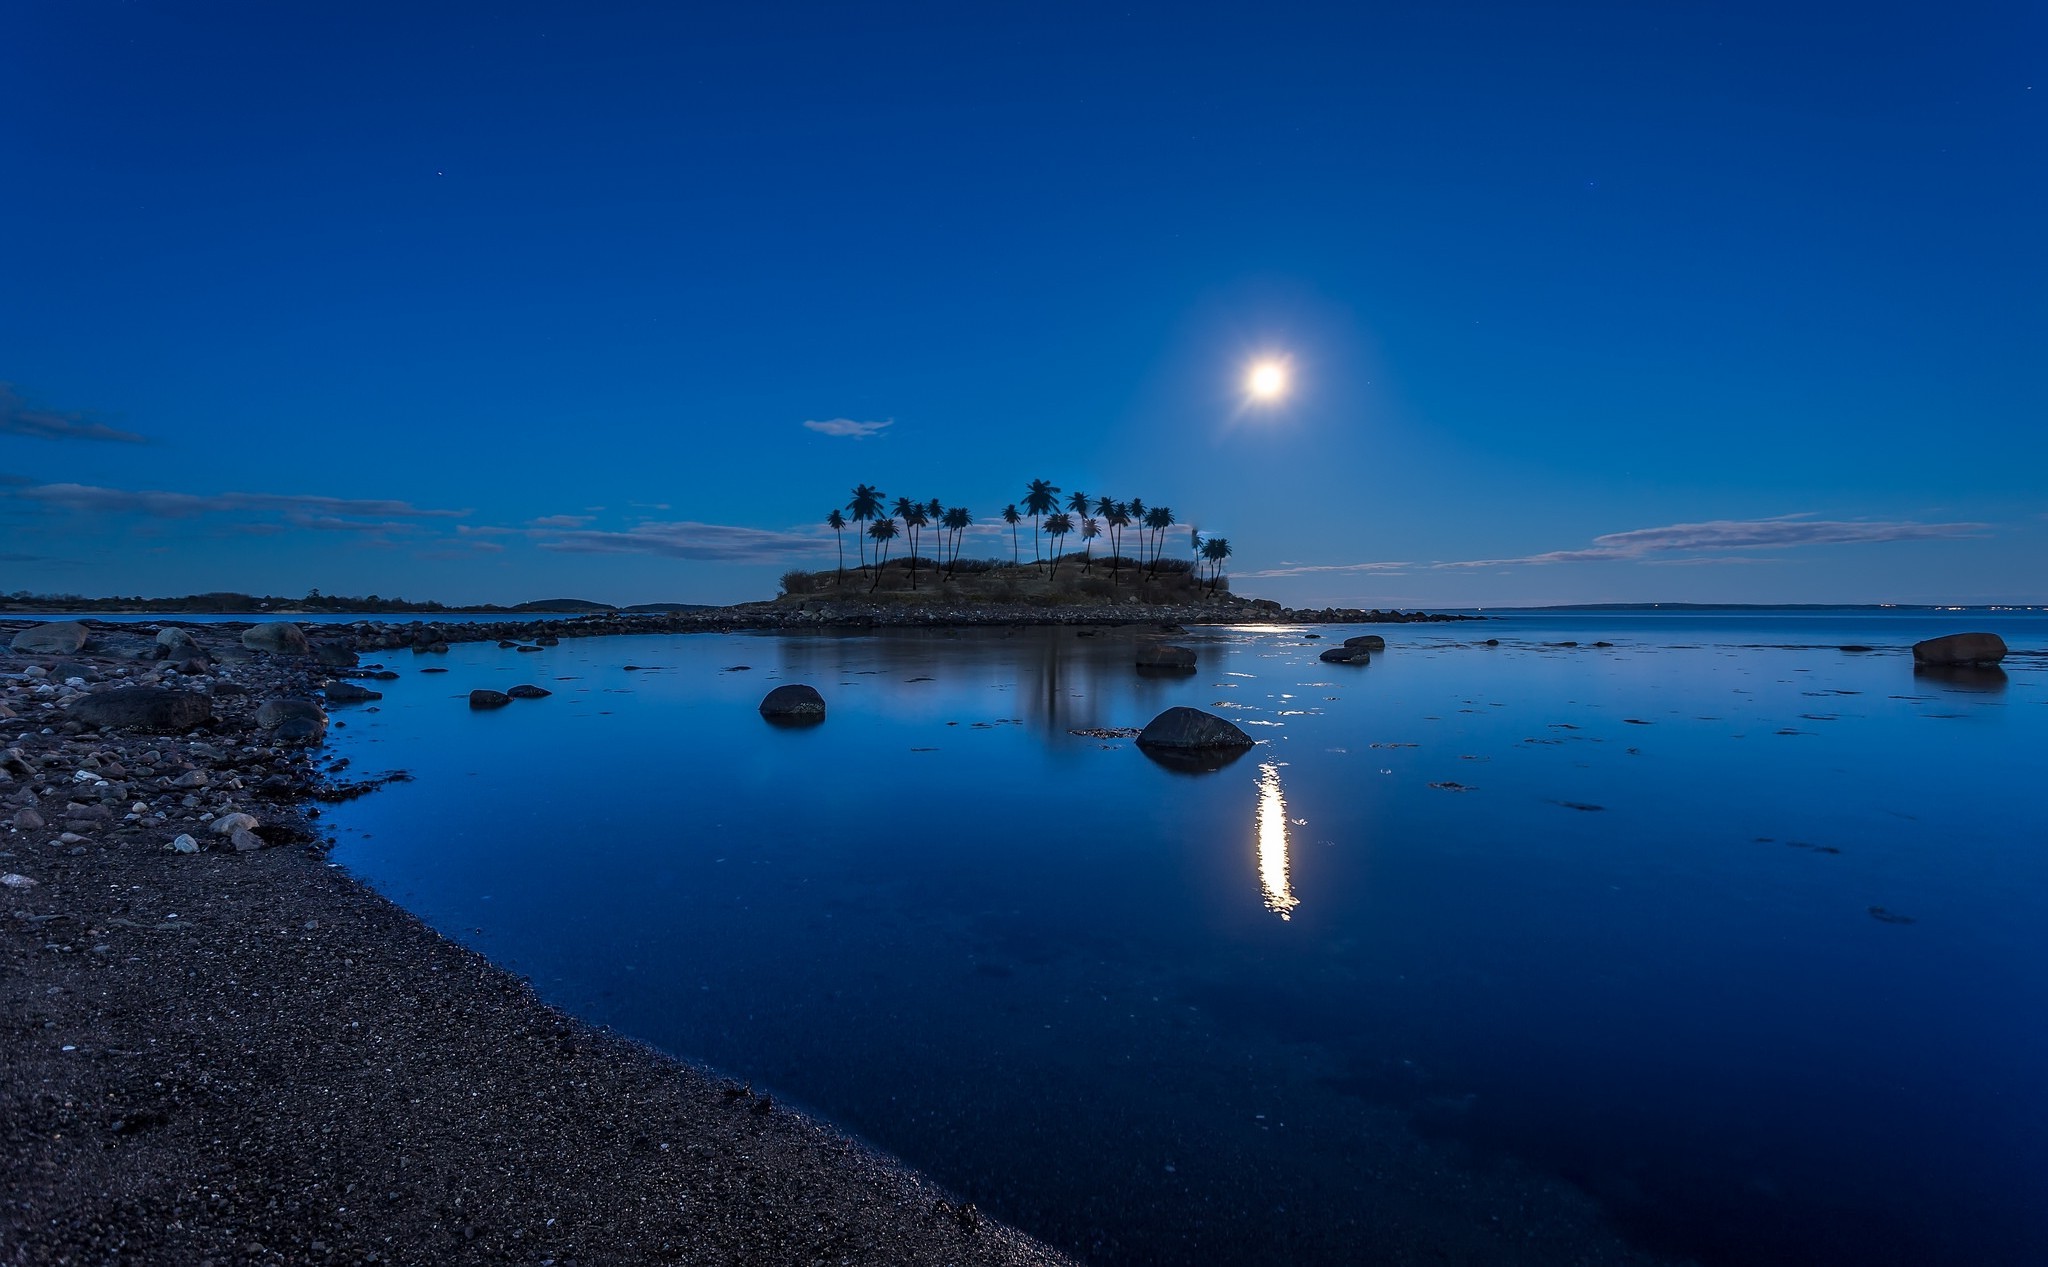 landscape, Nature, Moonlight, Coconuts, Island, Beach, Blue, Water, Reflection, Norway Wallpaper